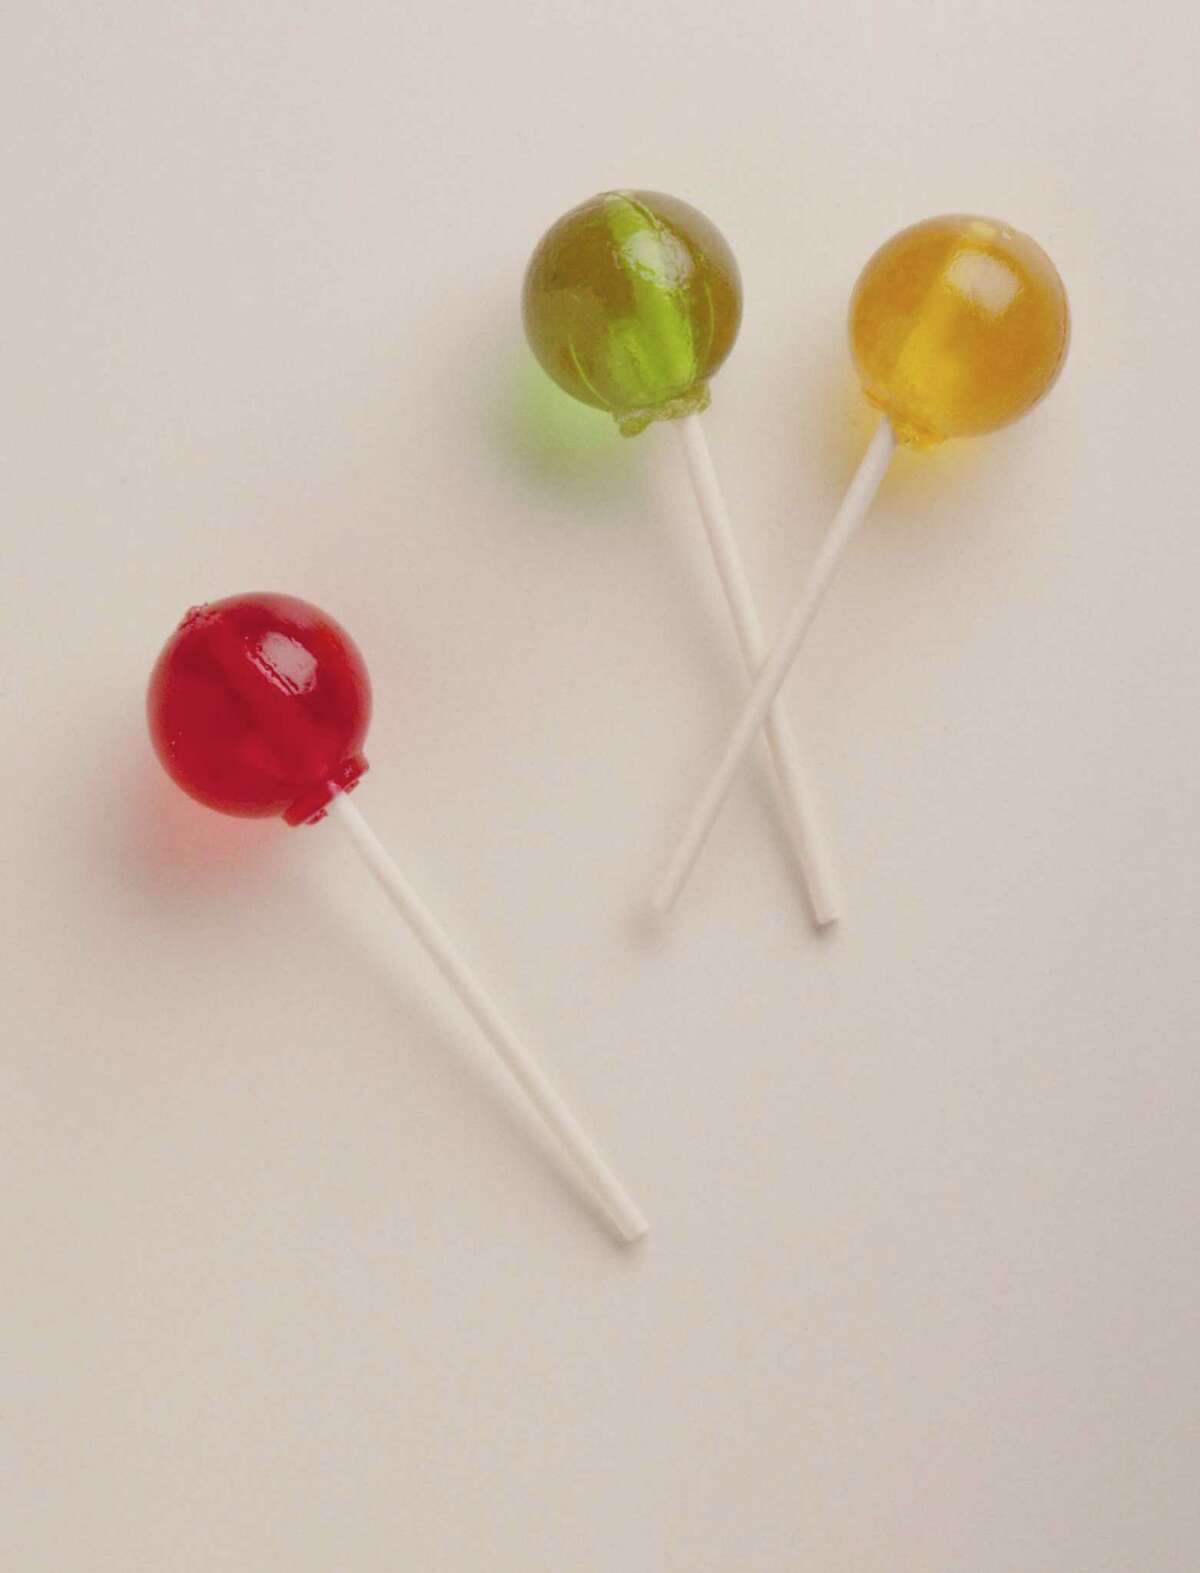 Lollipops could become Connecticut’s “state candy” under legislation approved in the House of Representatives